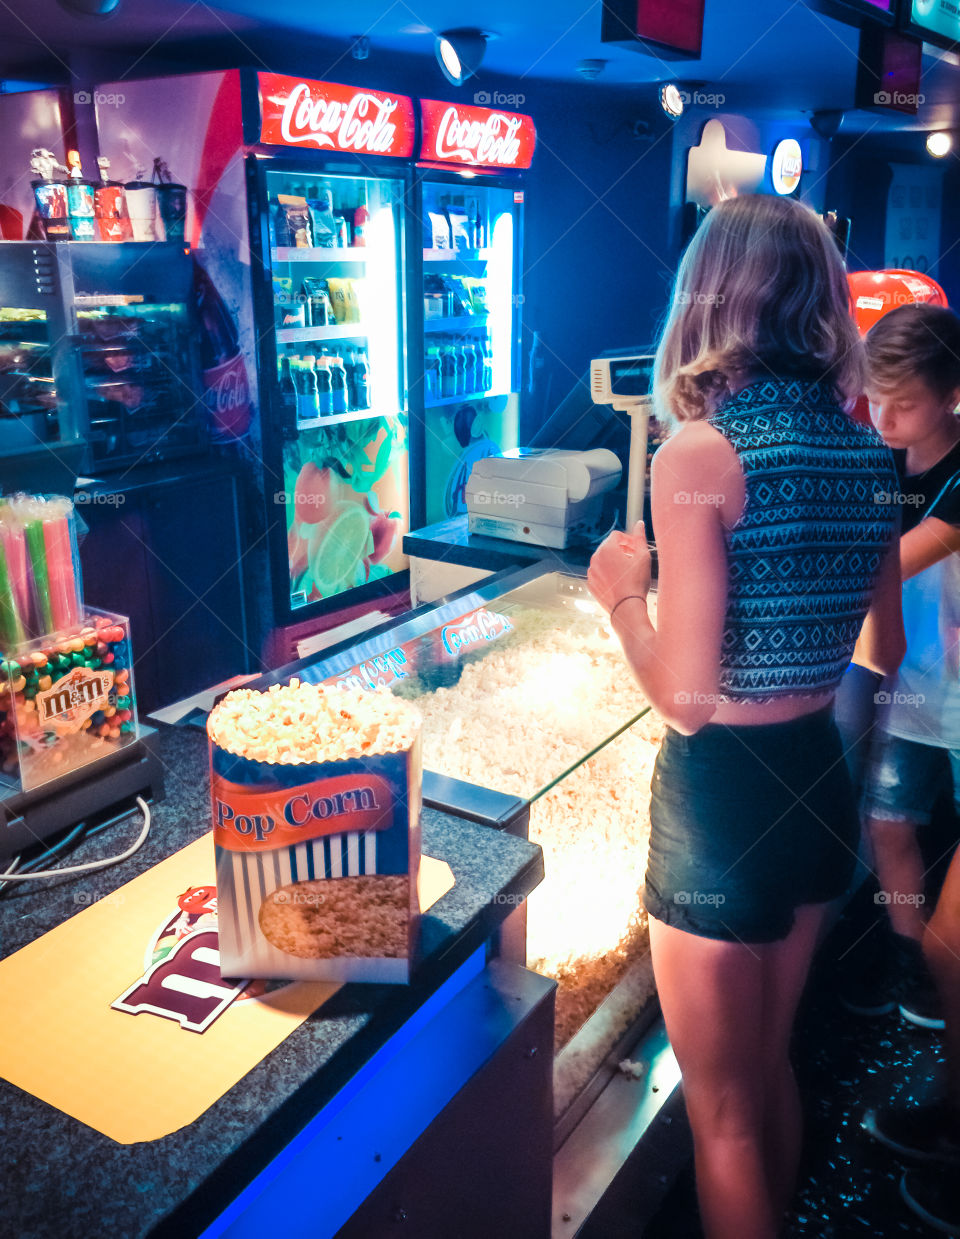 Customers Buying Pop Corn And Beverages At The Cinema
